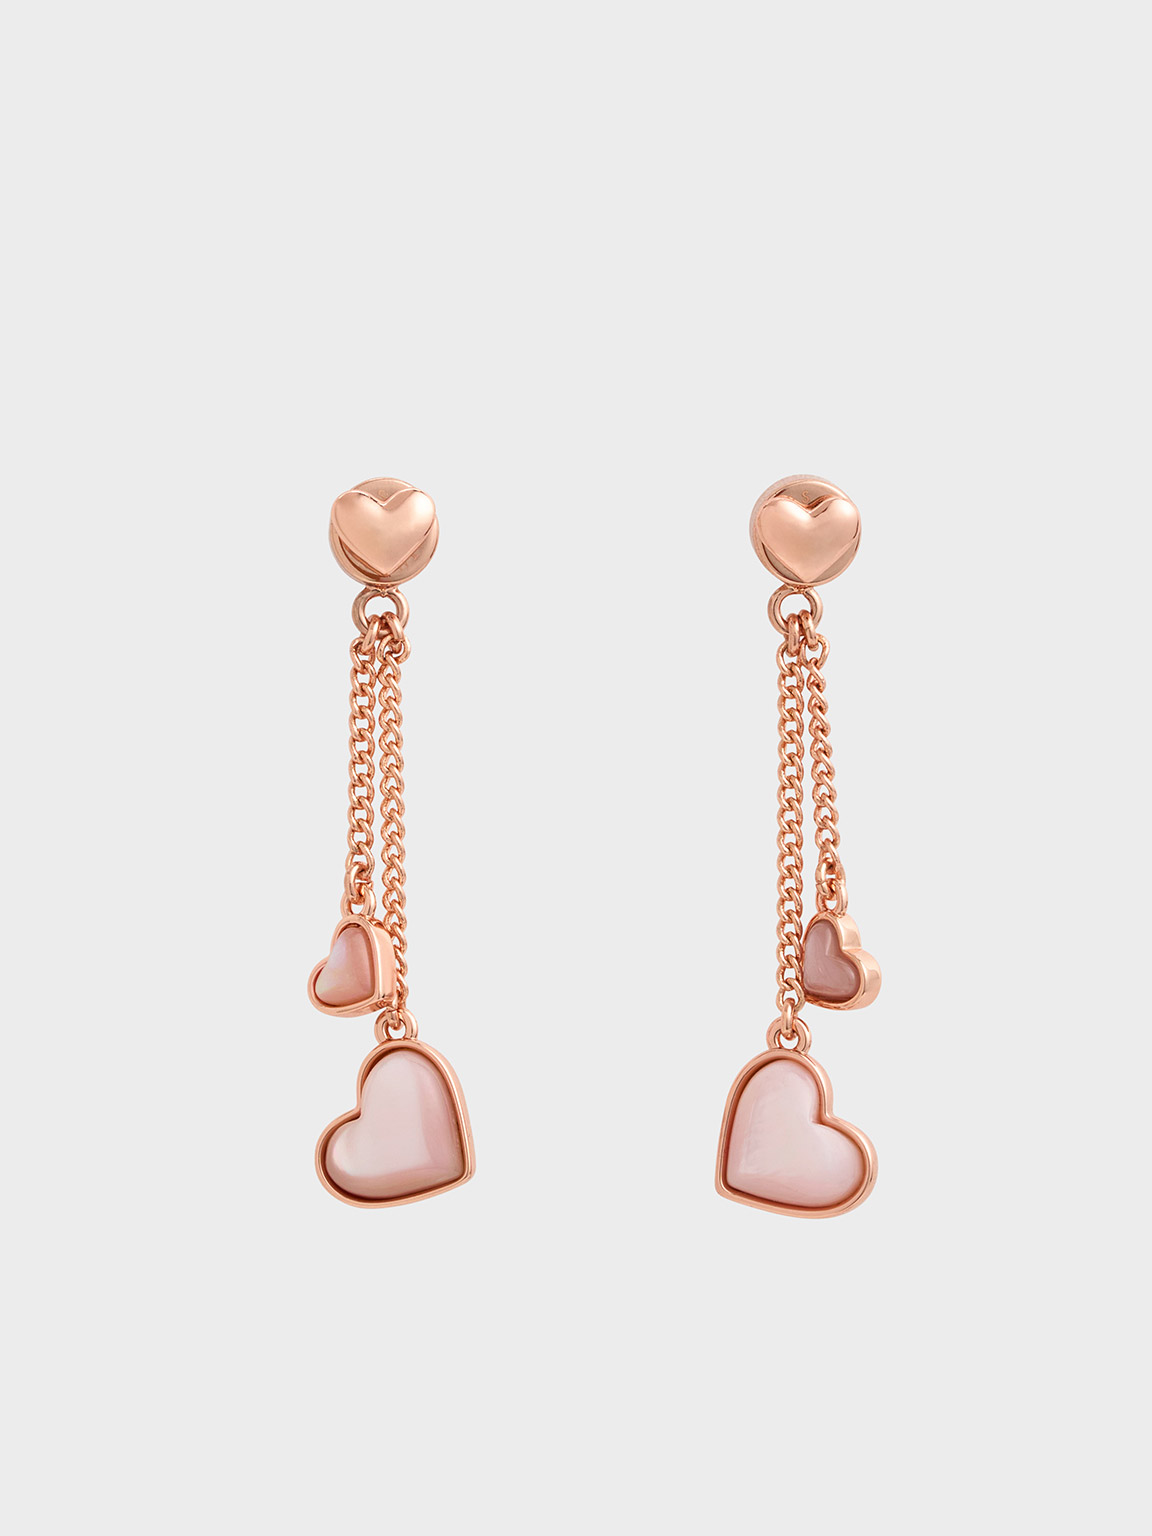 & Drop - Heart Rose Stone IE Earrings CHARLES Double Gold KEITH Annalise